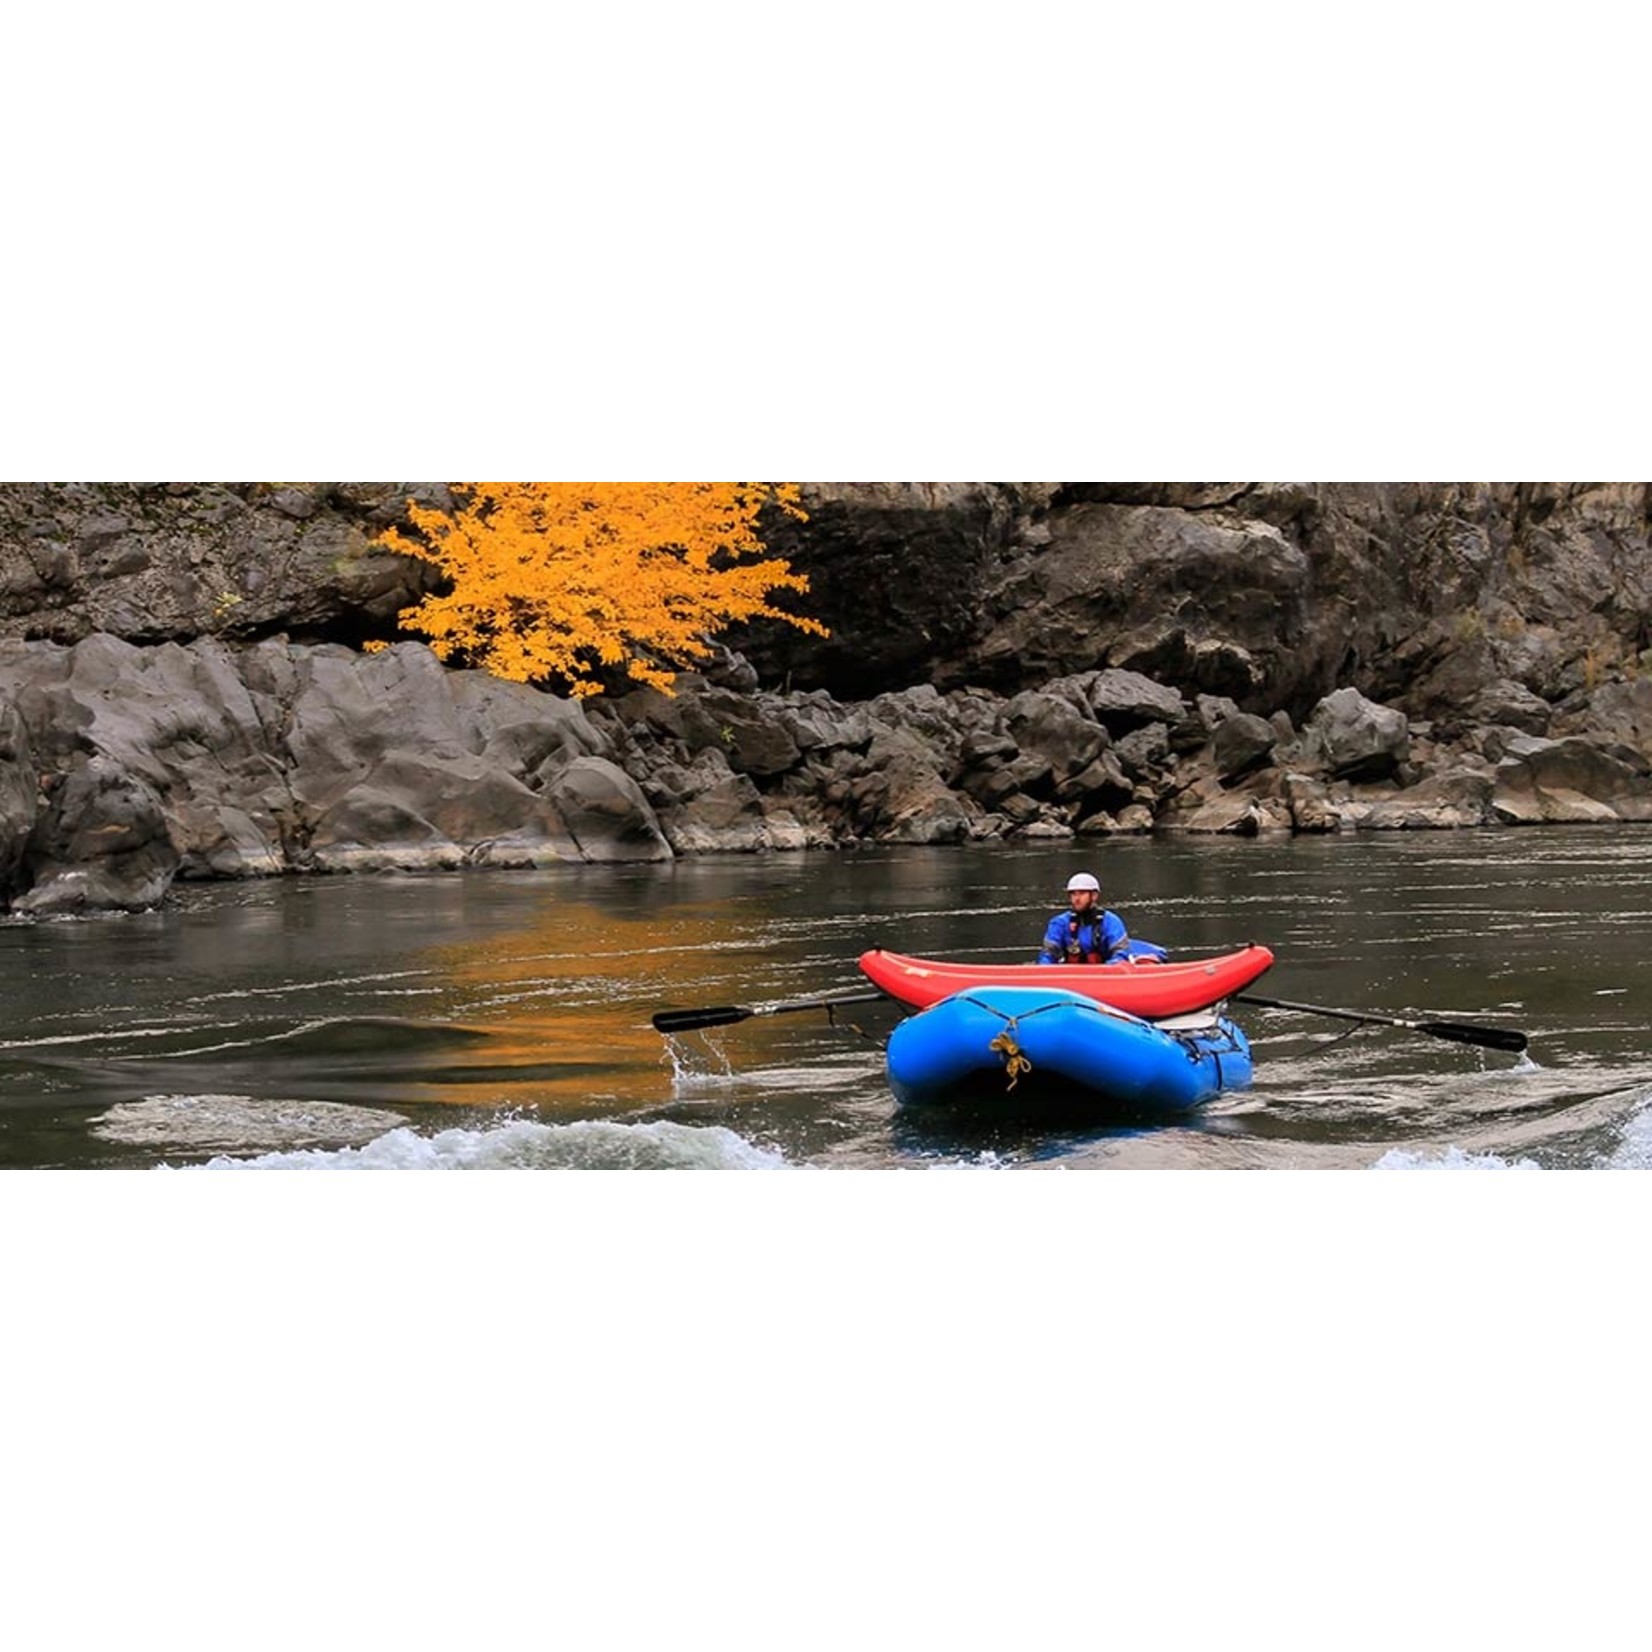 Hyside Inflatables Hyside K1 9.0 Kayak